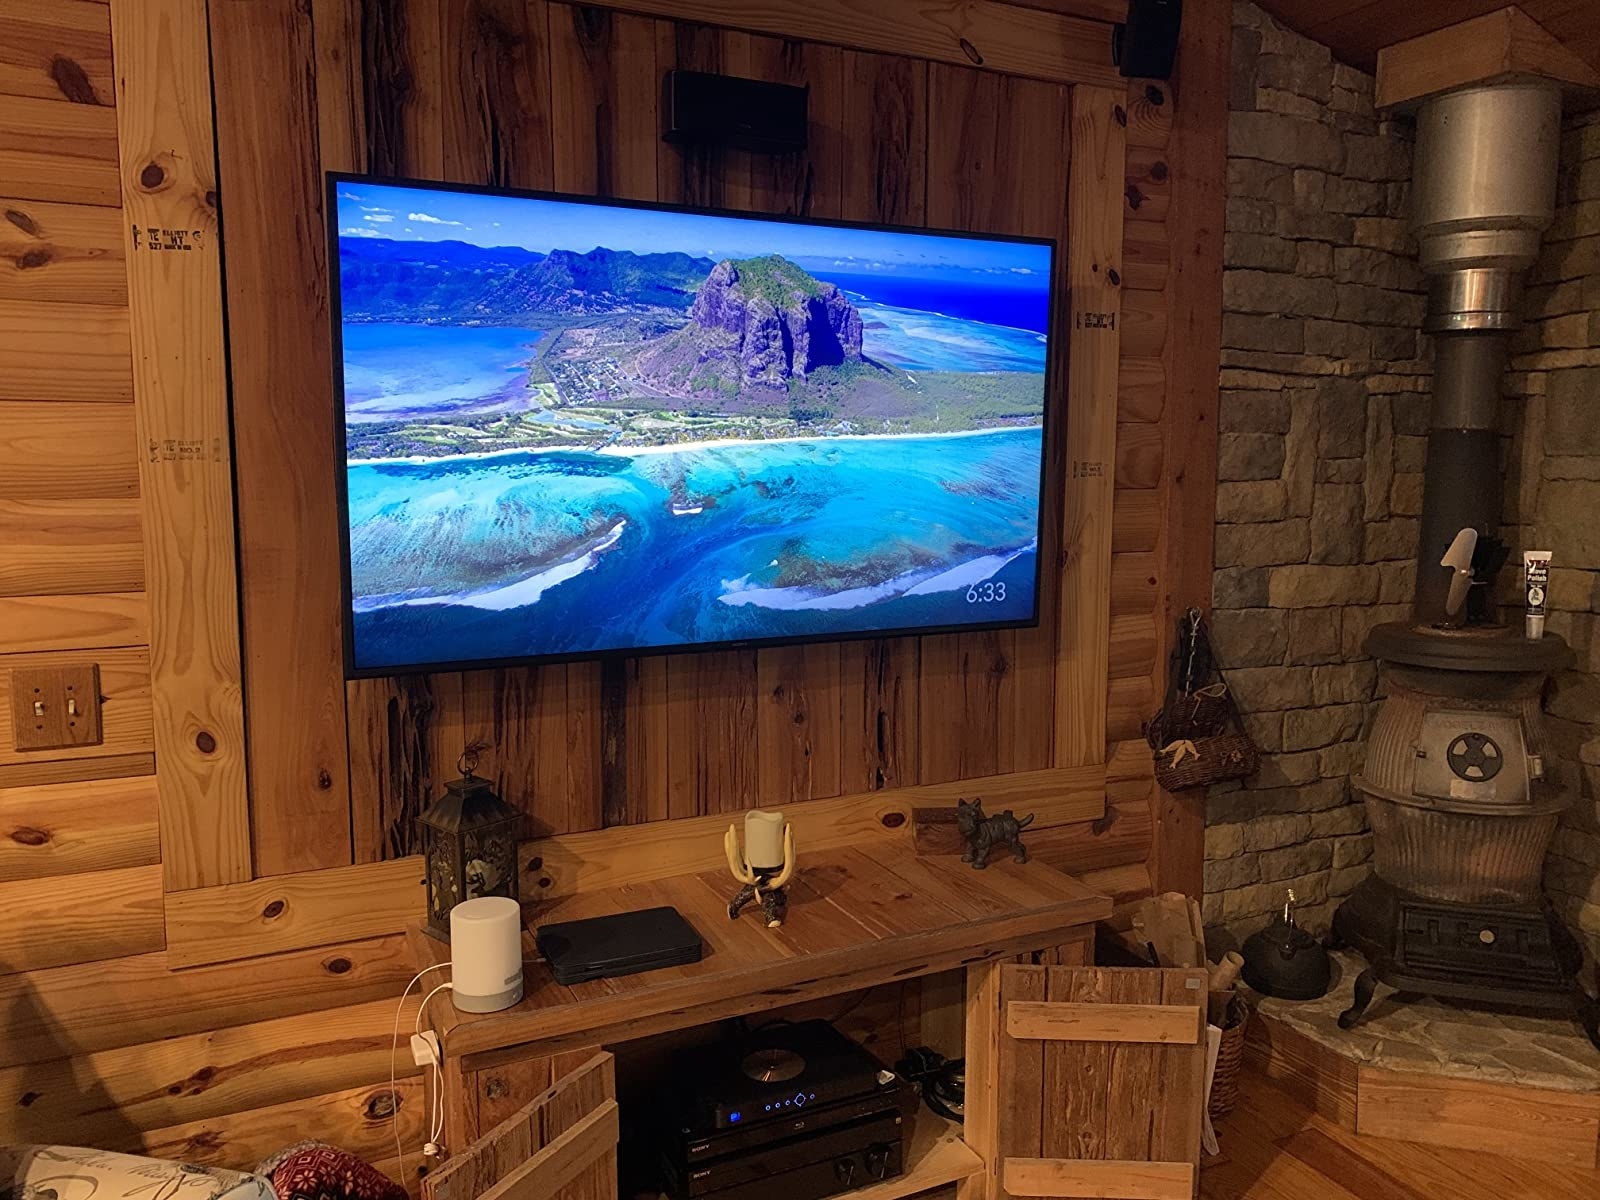 Reviewer photo of the TV mounted on a wall